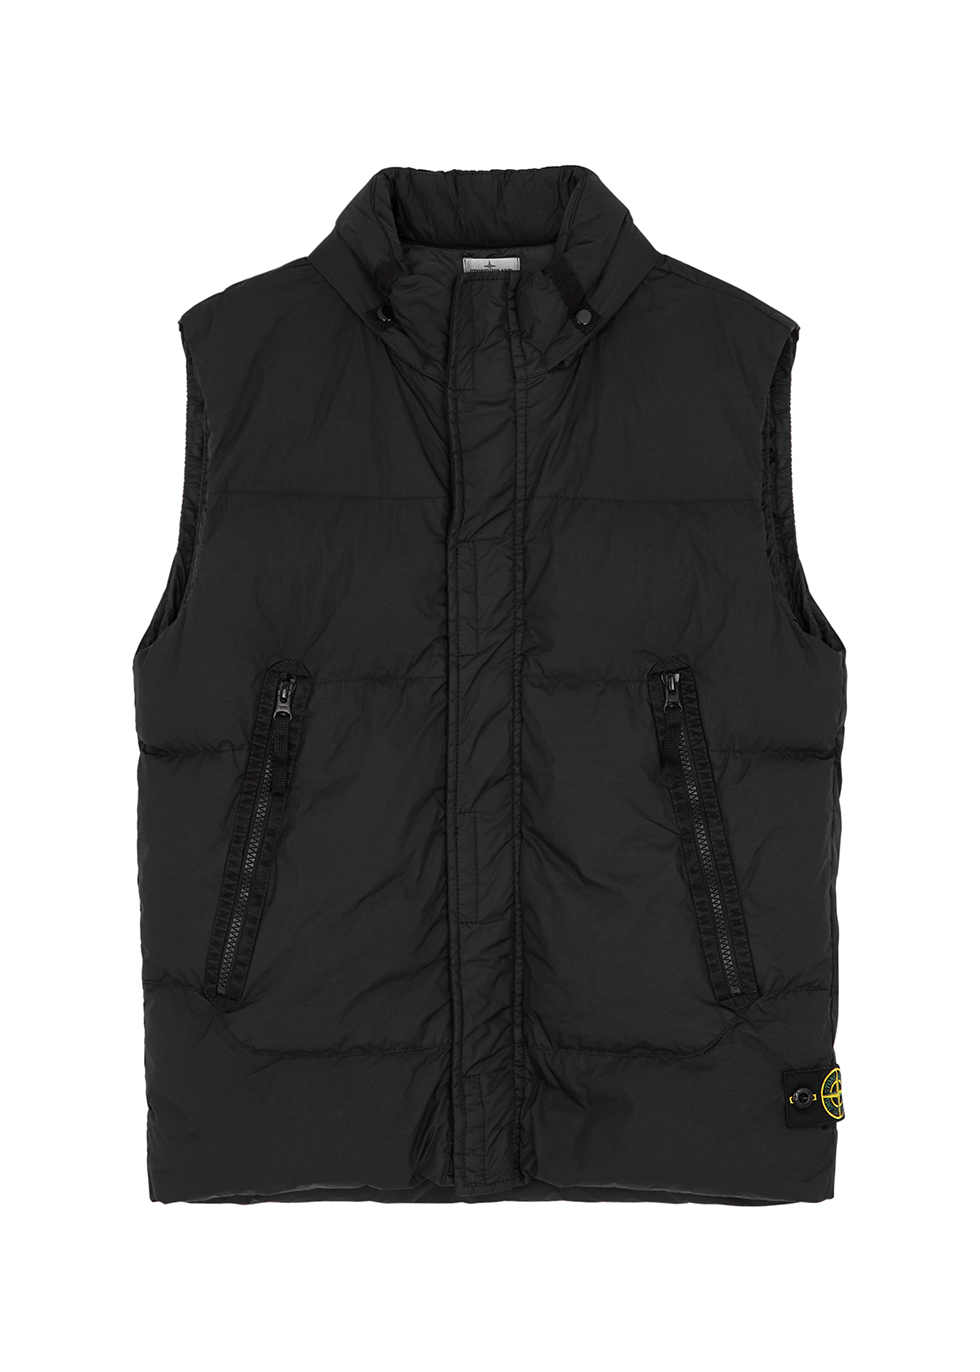 KIDS Black quilted shell gilet 10-12 years Harvey Nichols Clothing Jackets Gilets 